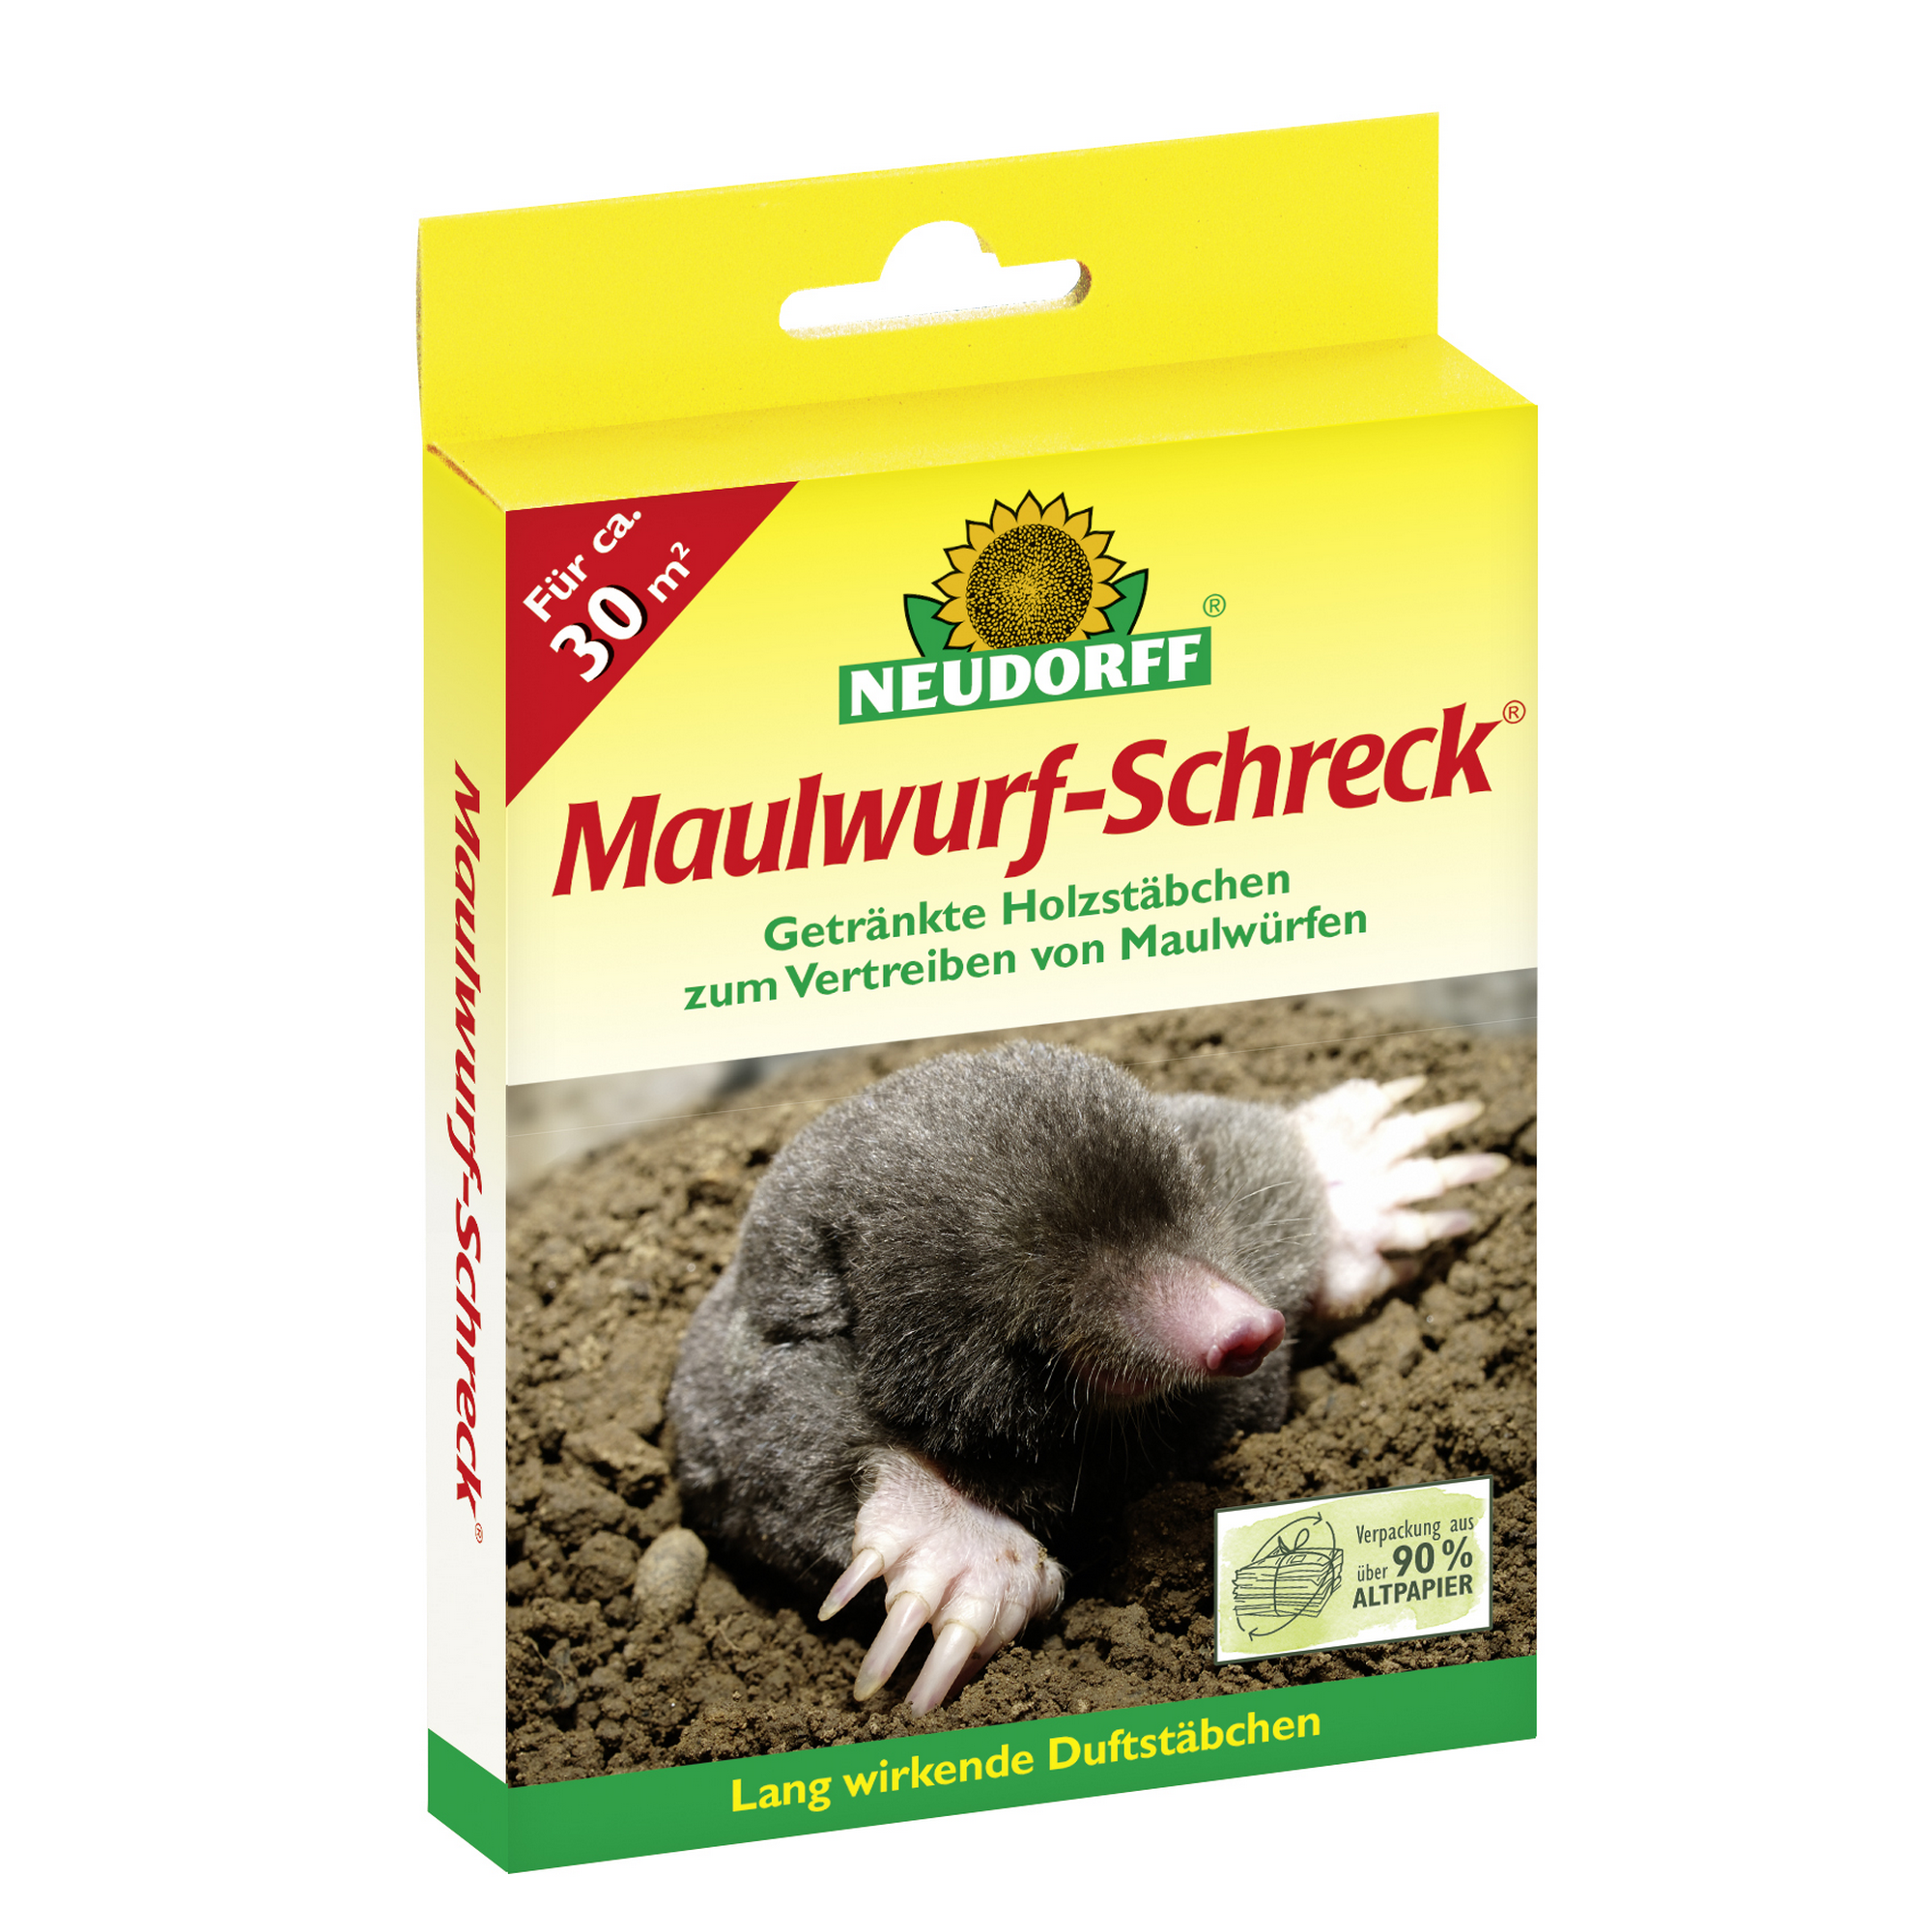 Maulwurf-Schreck 30 Stück + product picture